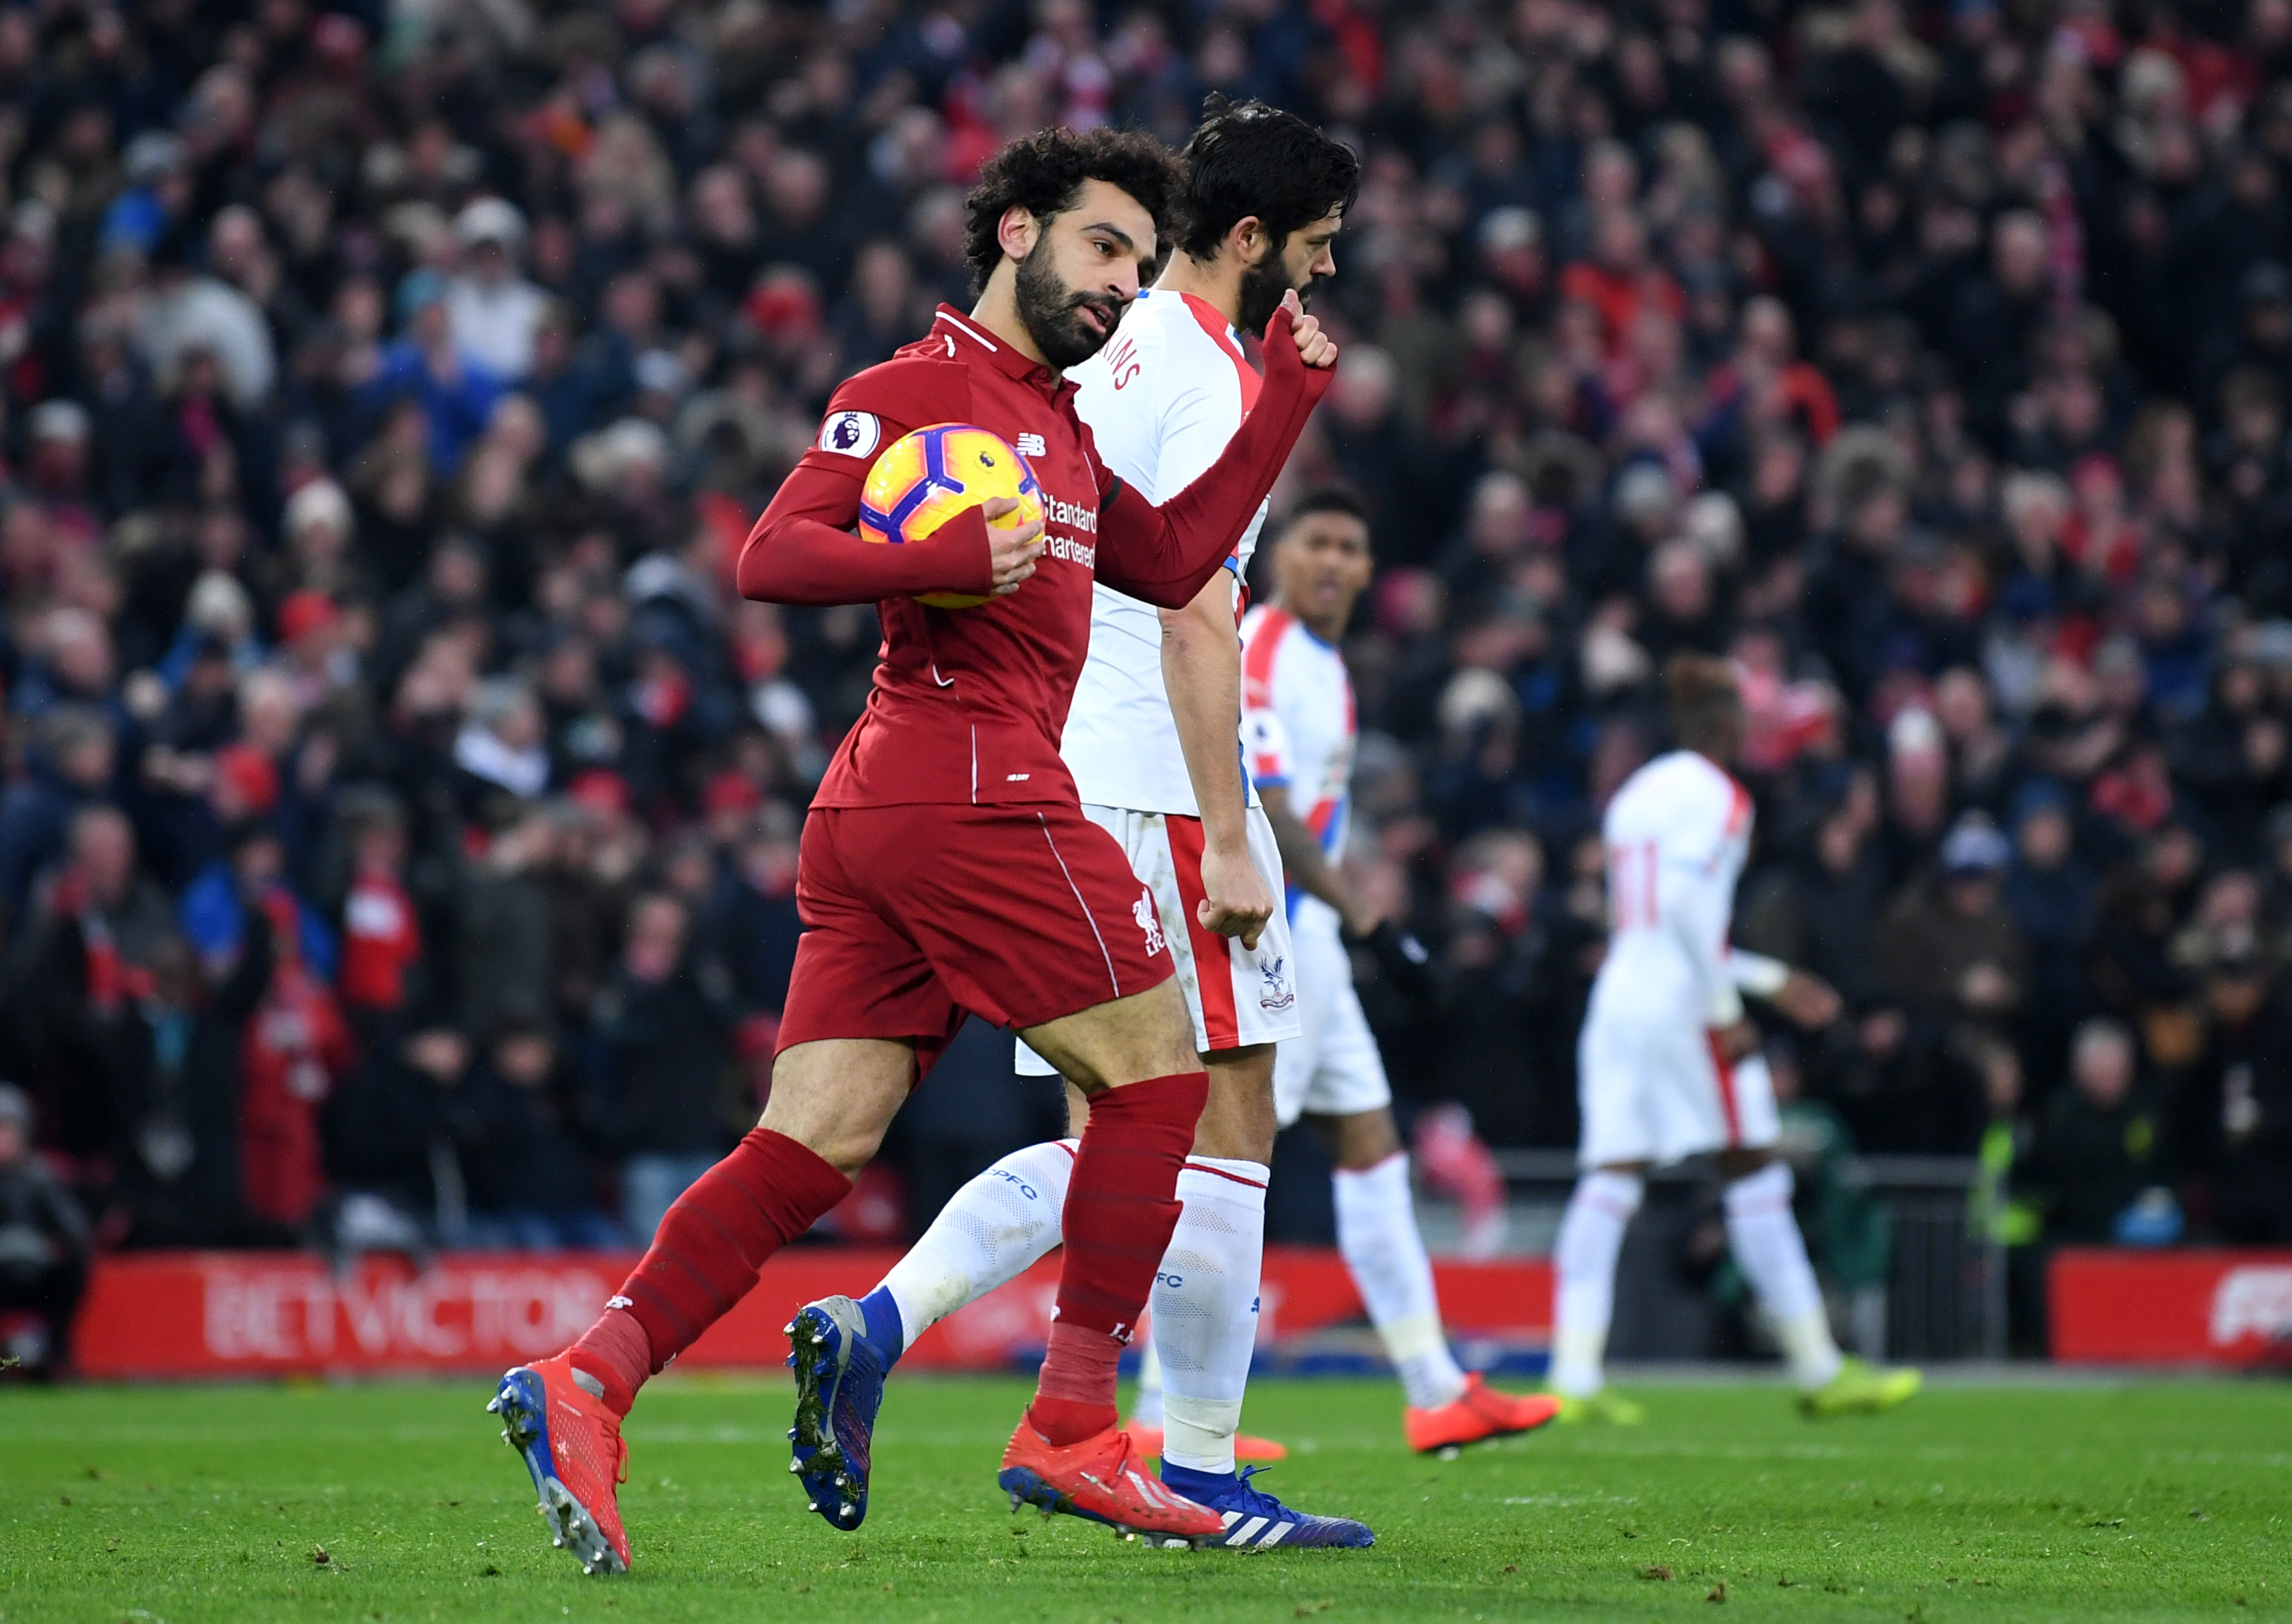 Salah to the rescue (Photo by Laurence Griffiths/Getty Images)